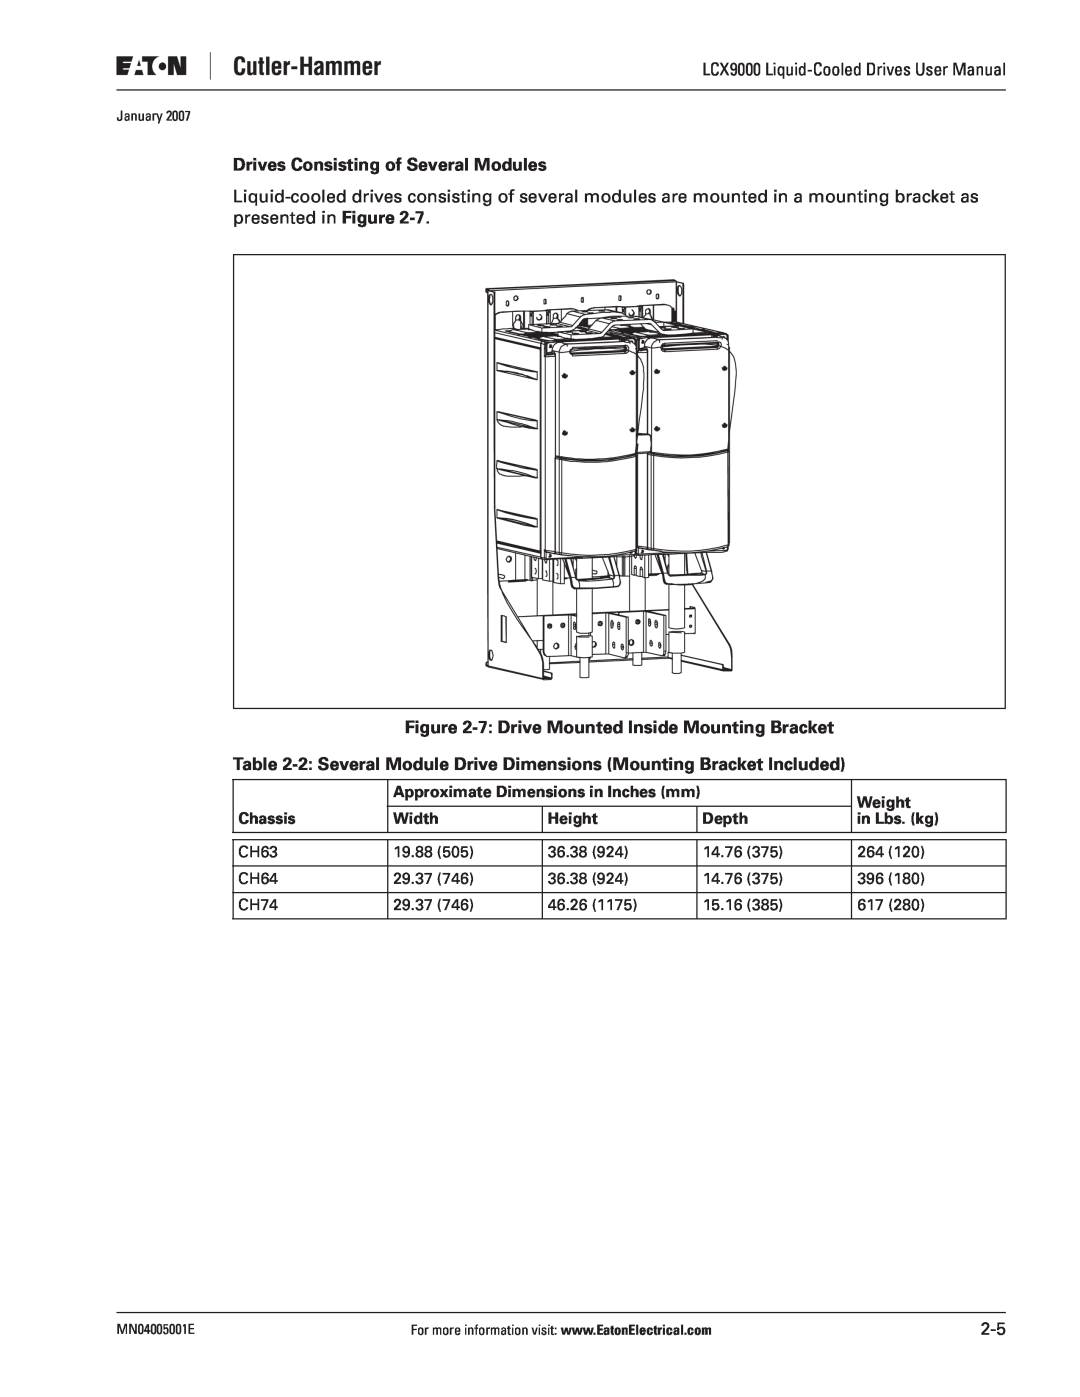 J. T. Eaton LCX9000 user manual Drives Consisting of Several Modules, 7 Drive Mounted Inside Mounting Bracket 